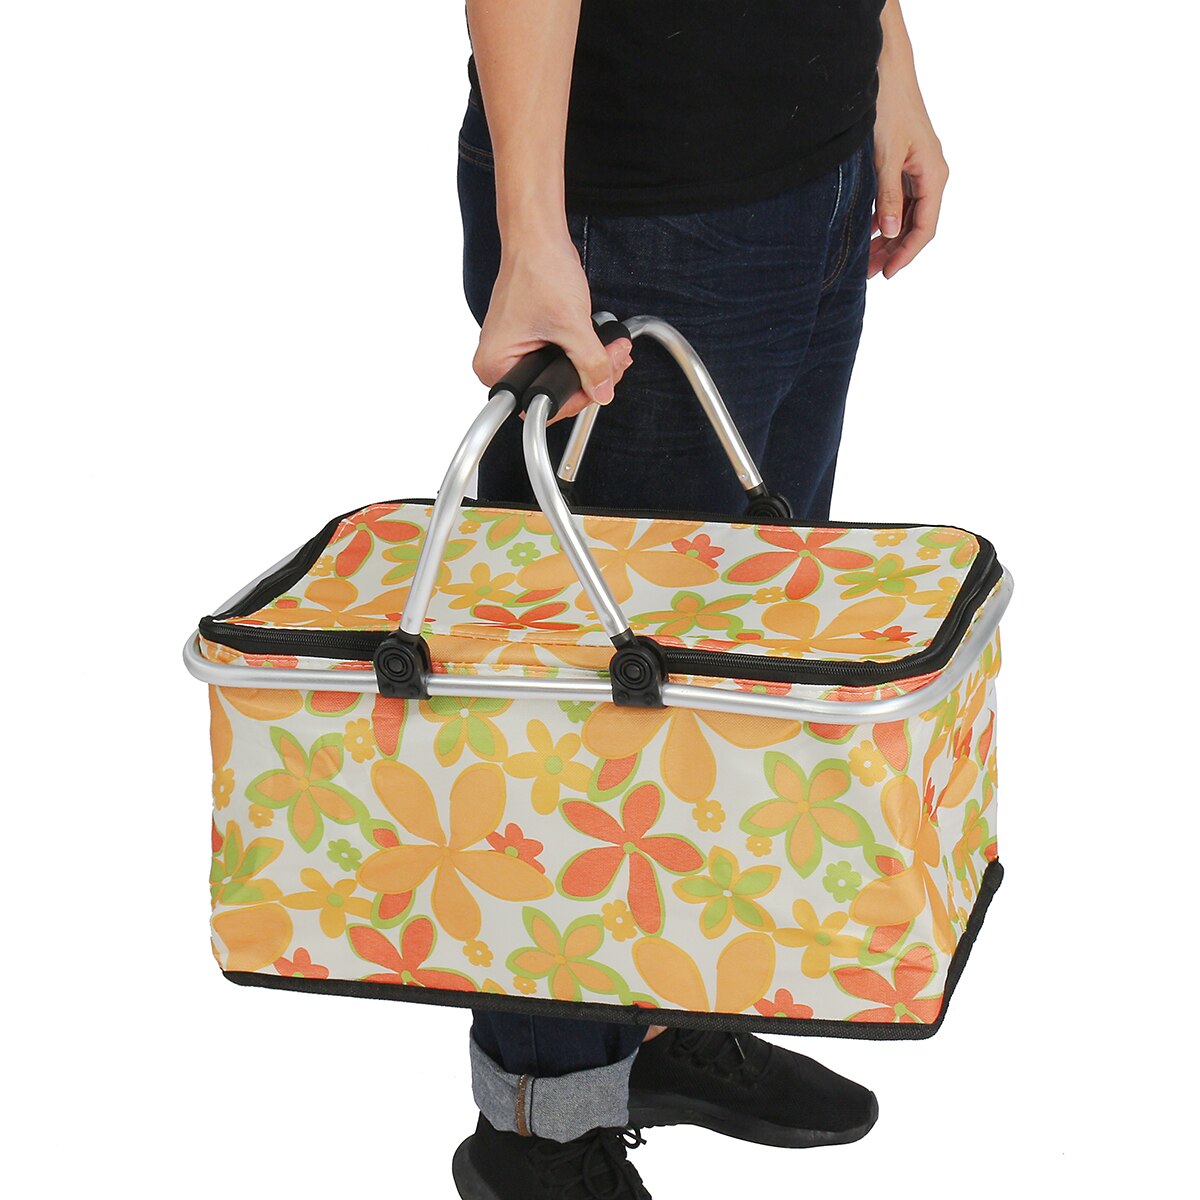 Insulated Picnic Basket Portable Container